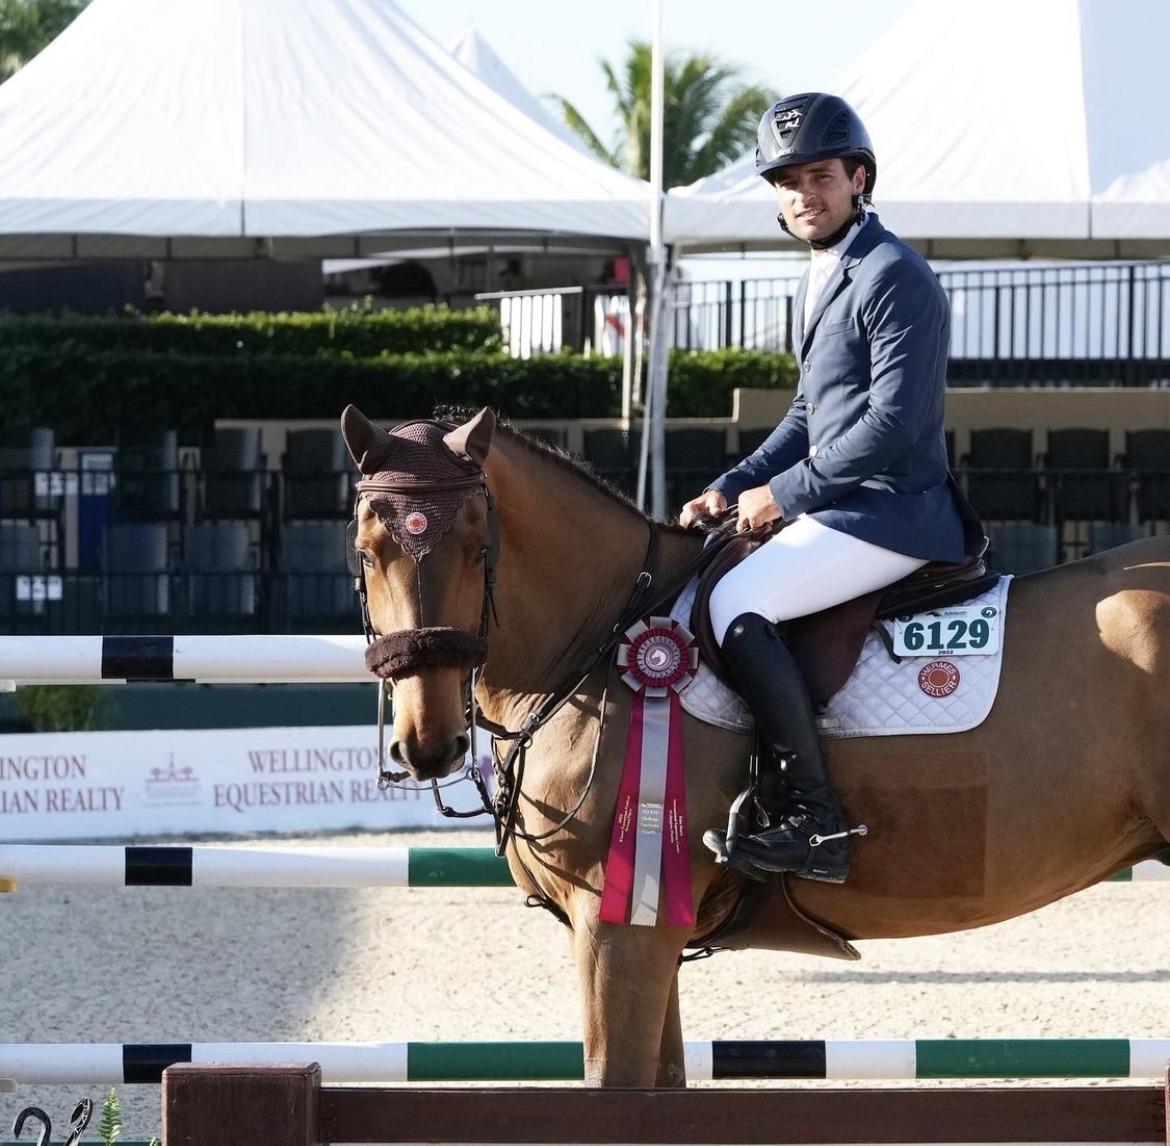 Cachemire de Braize 2nd in the $37,000 3* WEF Challenge Cup!